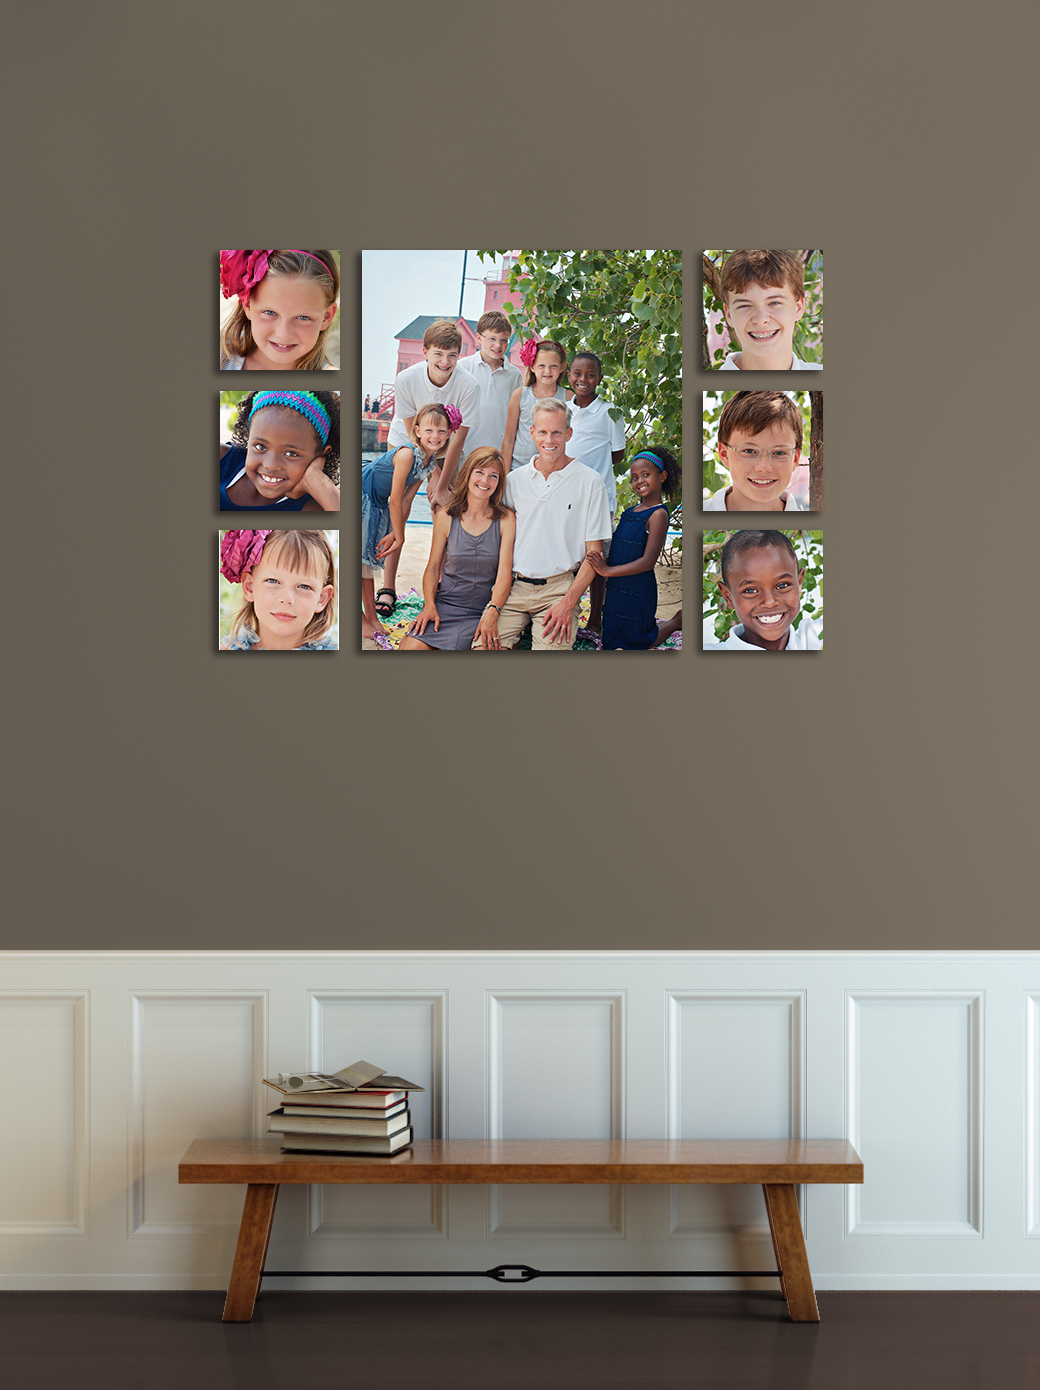 Featured image of post How To Display Family Photos On Wall - From my family photo experience, we hung a number of different images of various sizing on our wall and it looks incredibly professional yet totally fun, says paige.